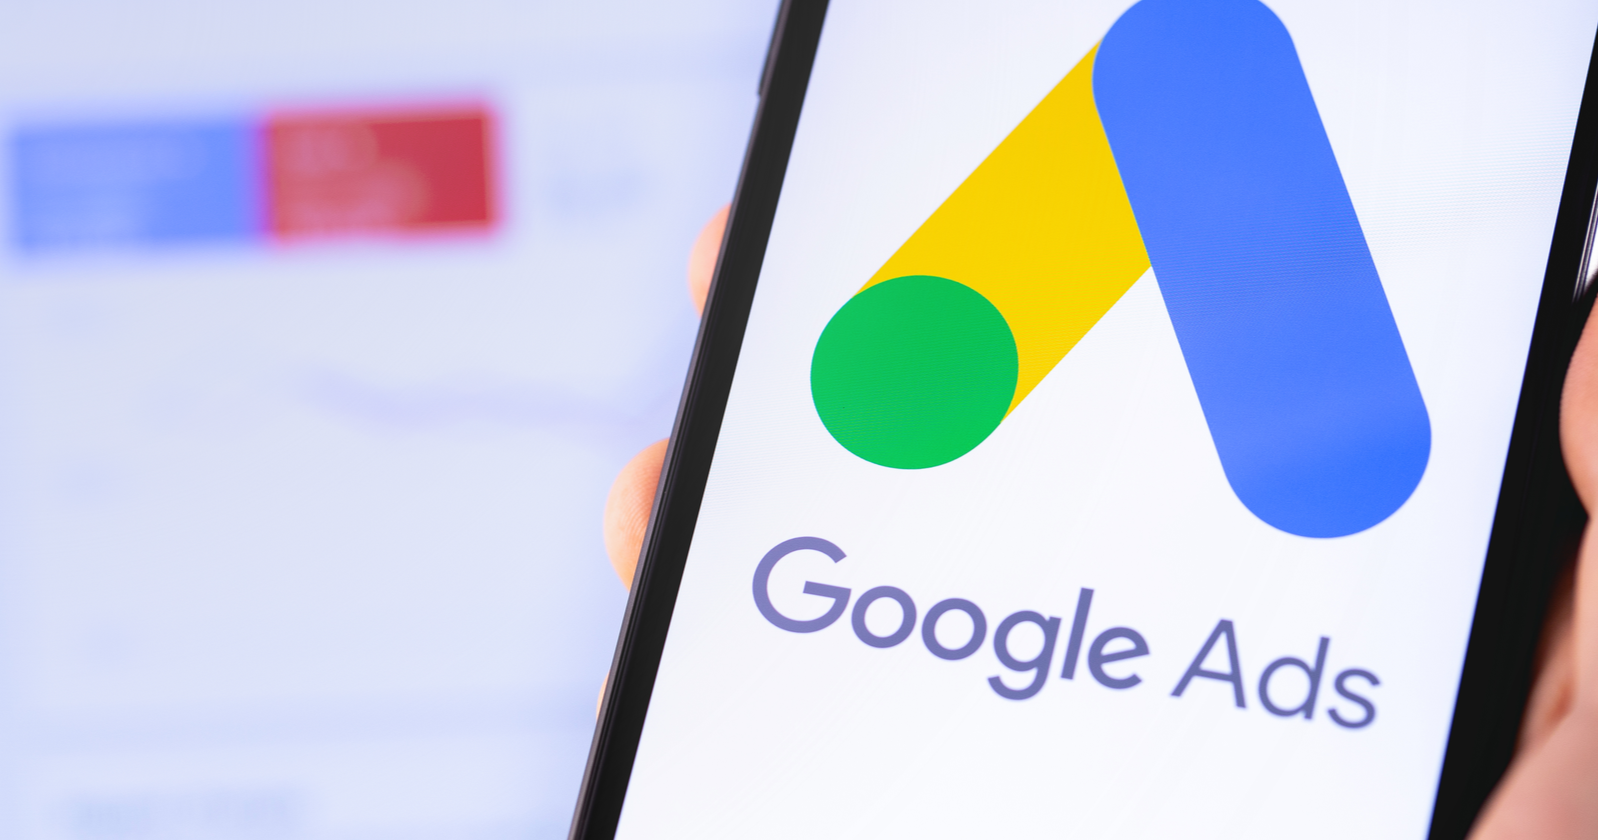 Google Search Ads 360 Updated: Here's What's New